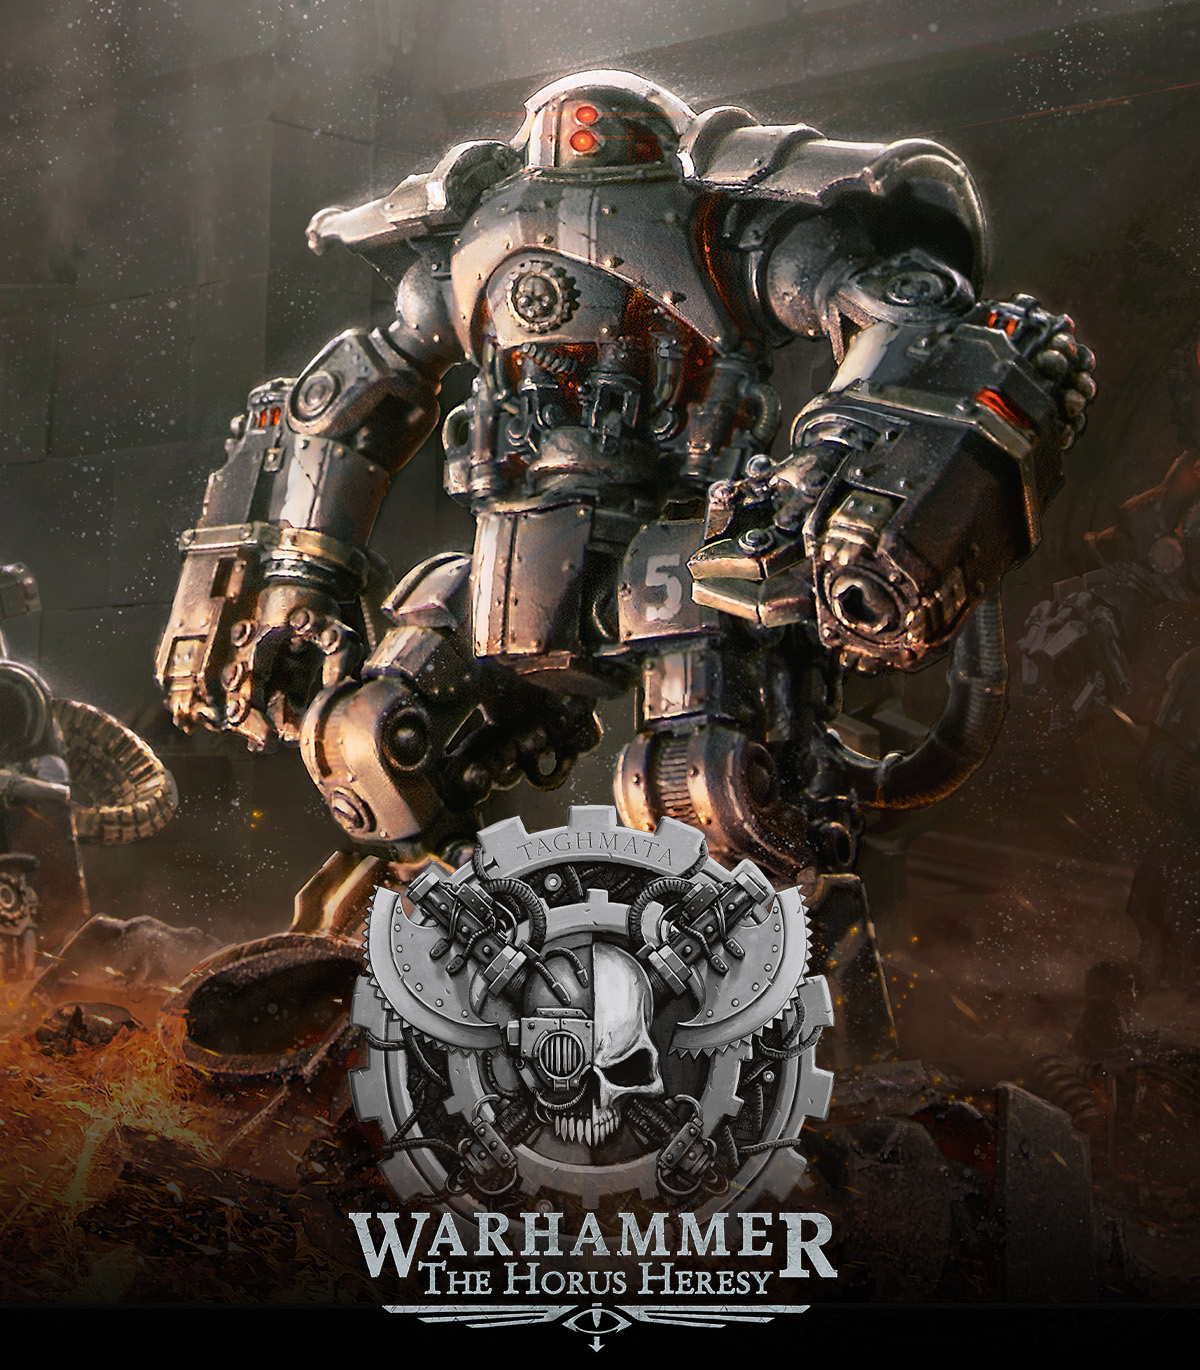 Warhammer: The Horus Heresy - For my next trick, I'll saw a Traitor in  half with my mind! Get a closer look at the new miniature for Warhammer:  The Horus Heresy